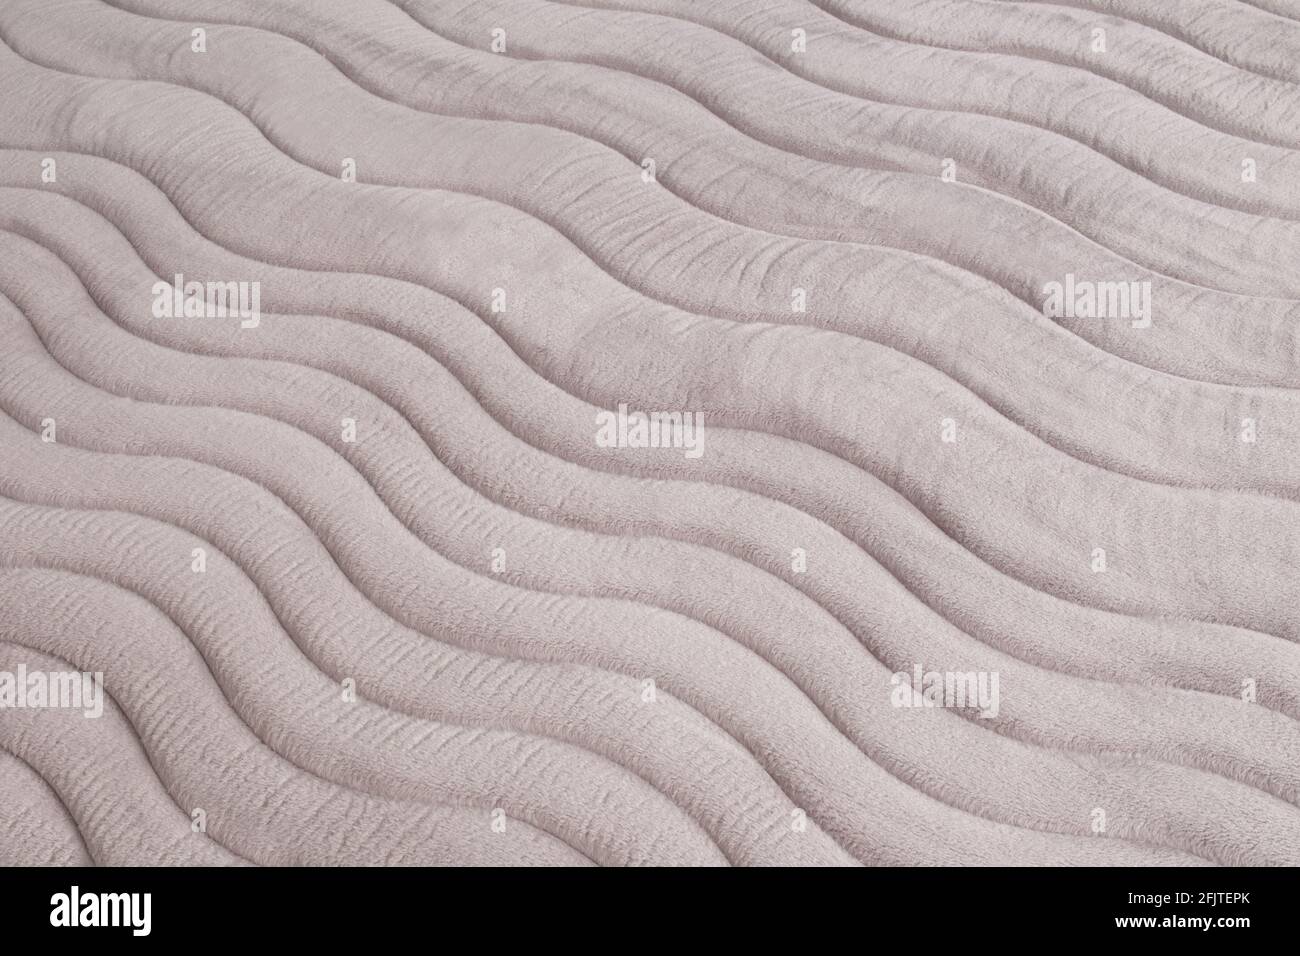 closeup of pattern on the gray mattress, texture surface as background Stock Photo